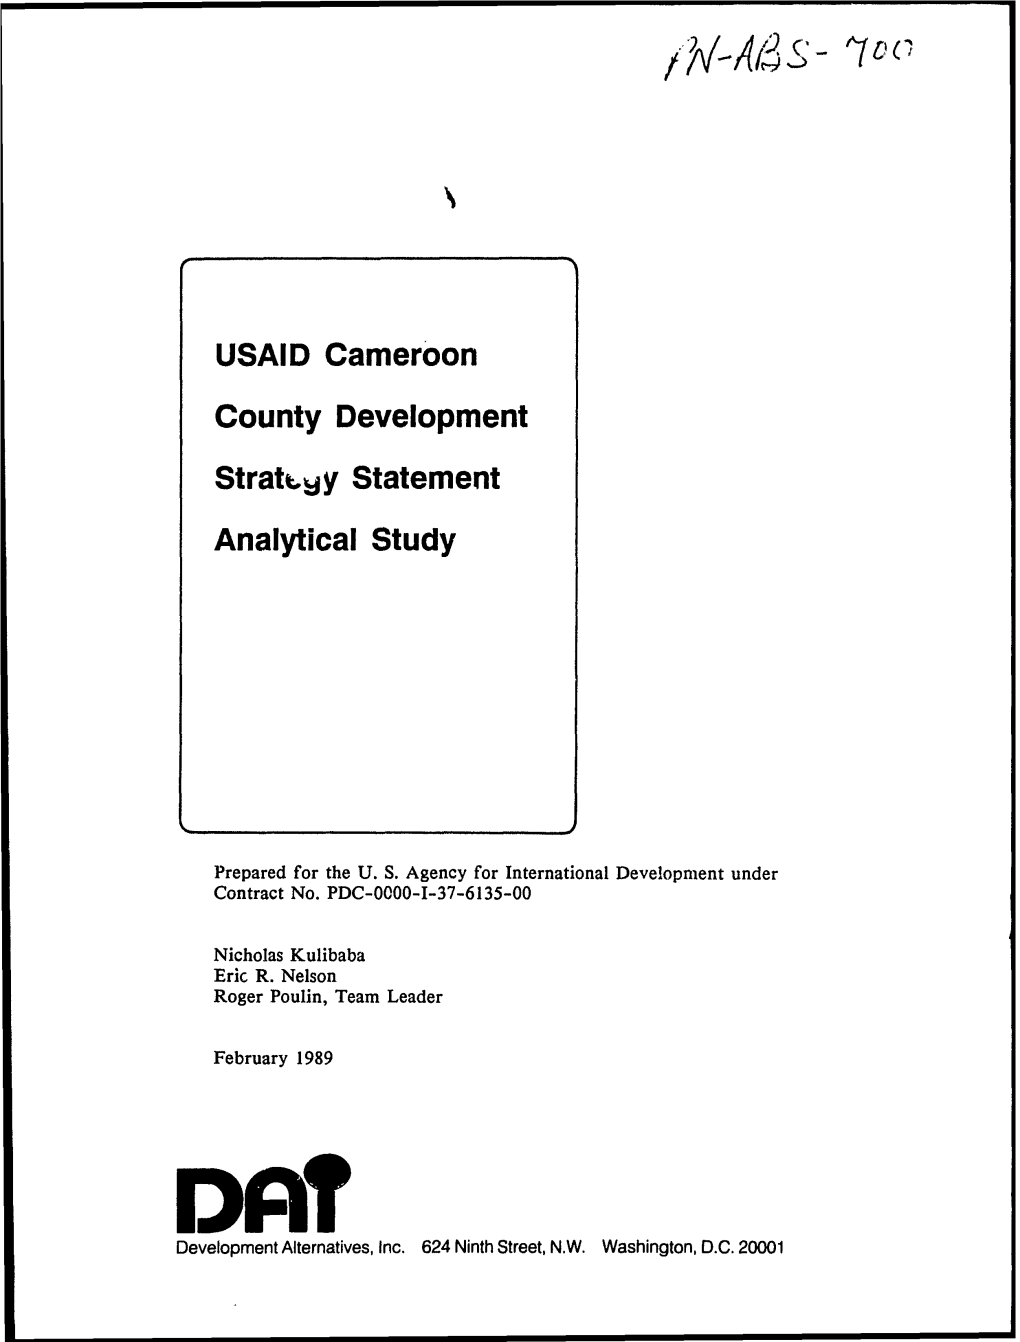 USAID Cameroon County Development Statement Analytical Study